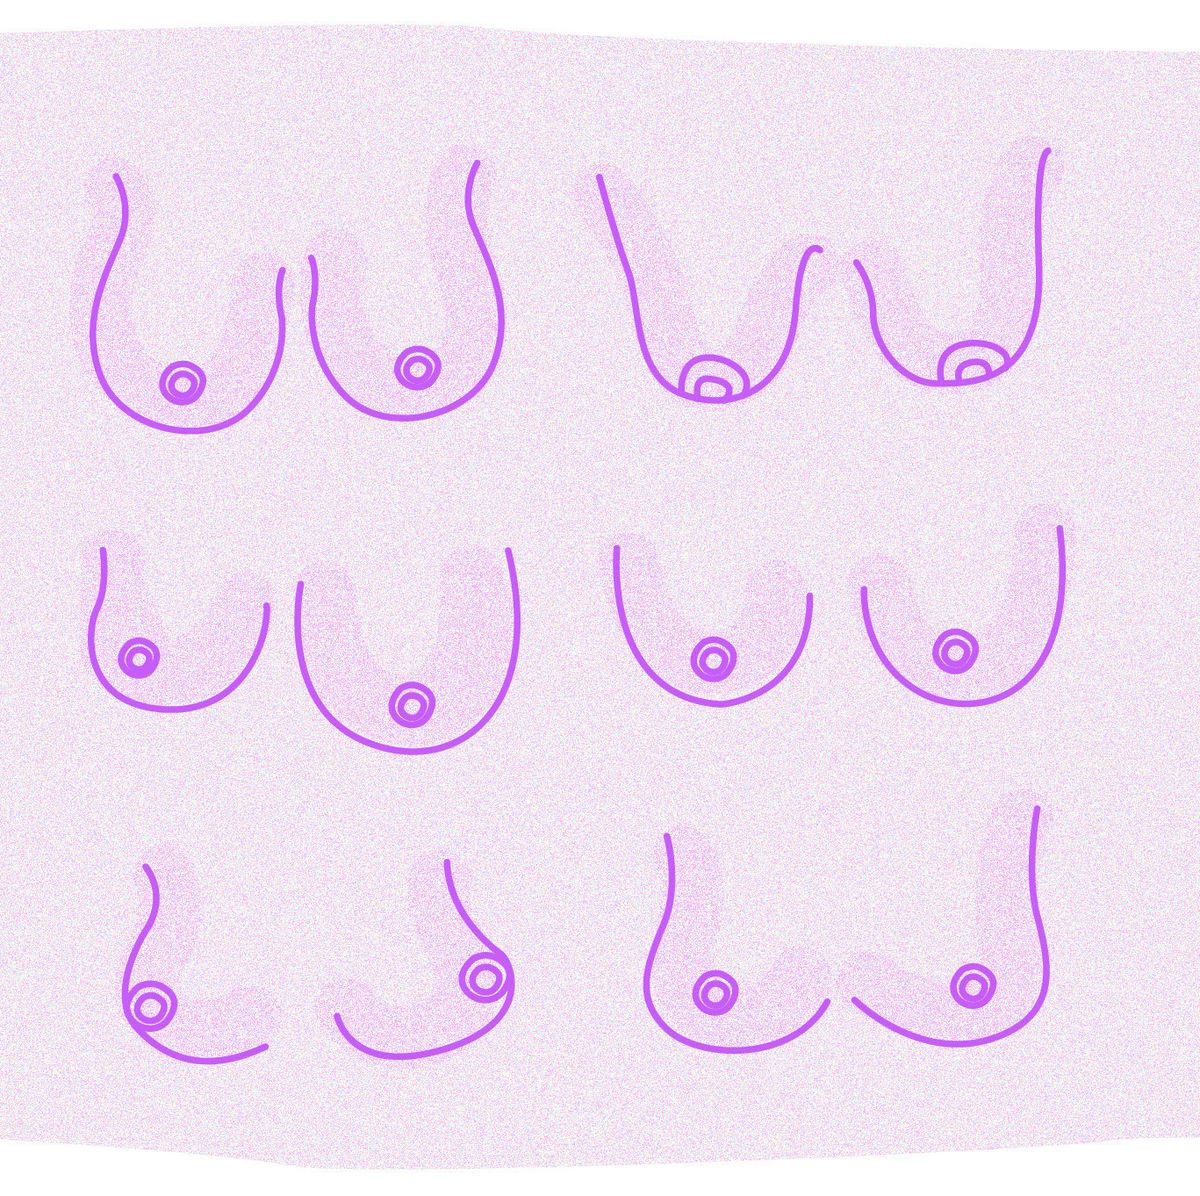 17 Different Types Of Boobs - Stay at Home Mum